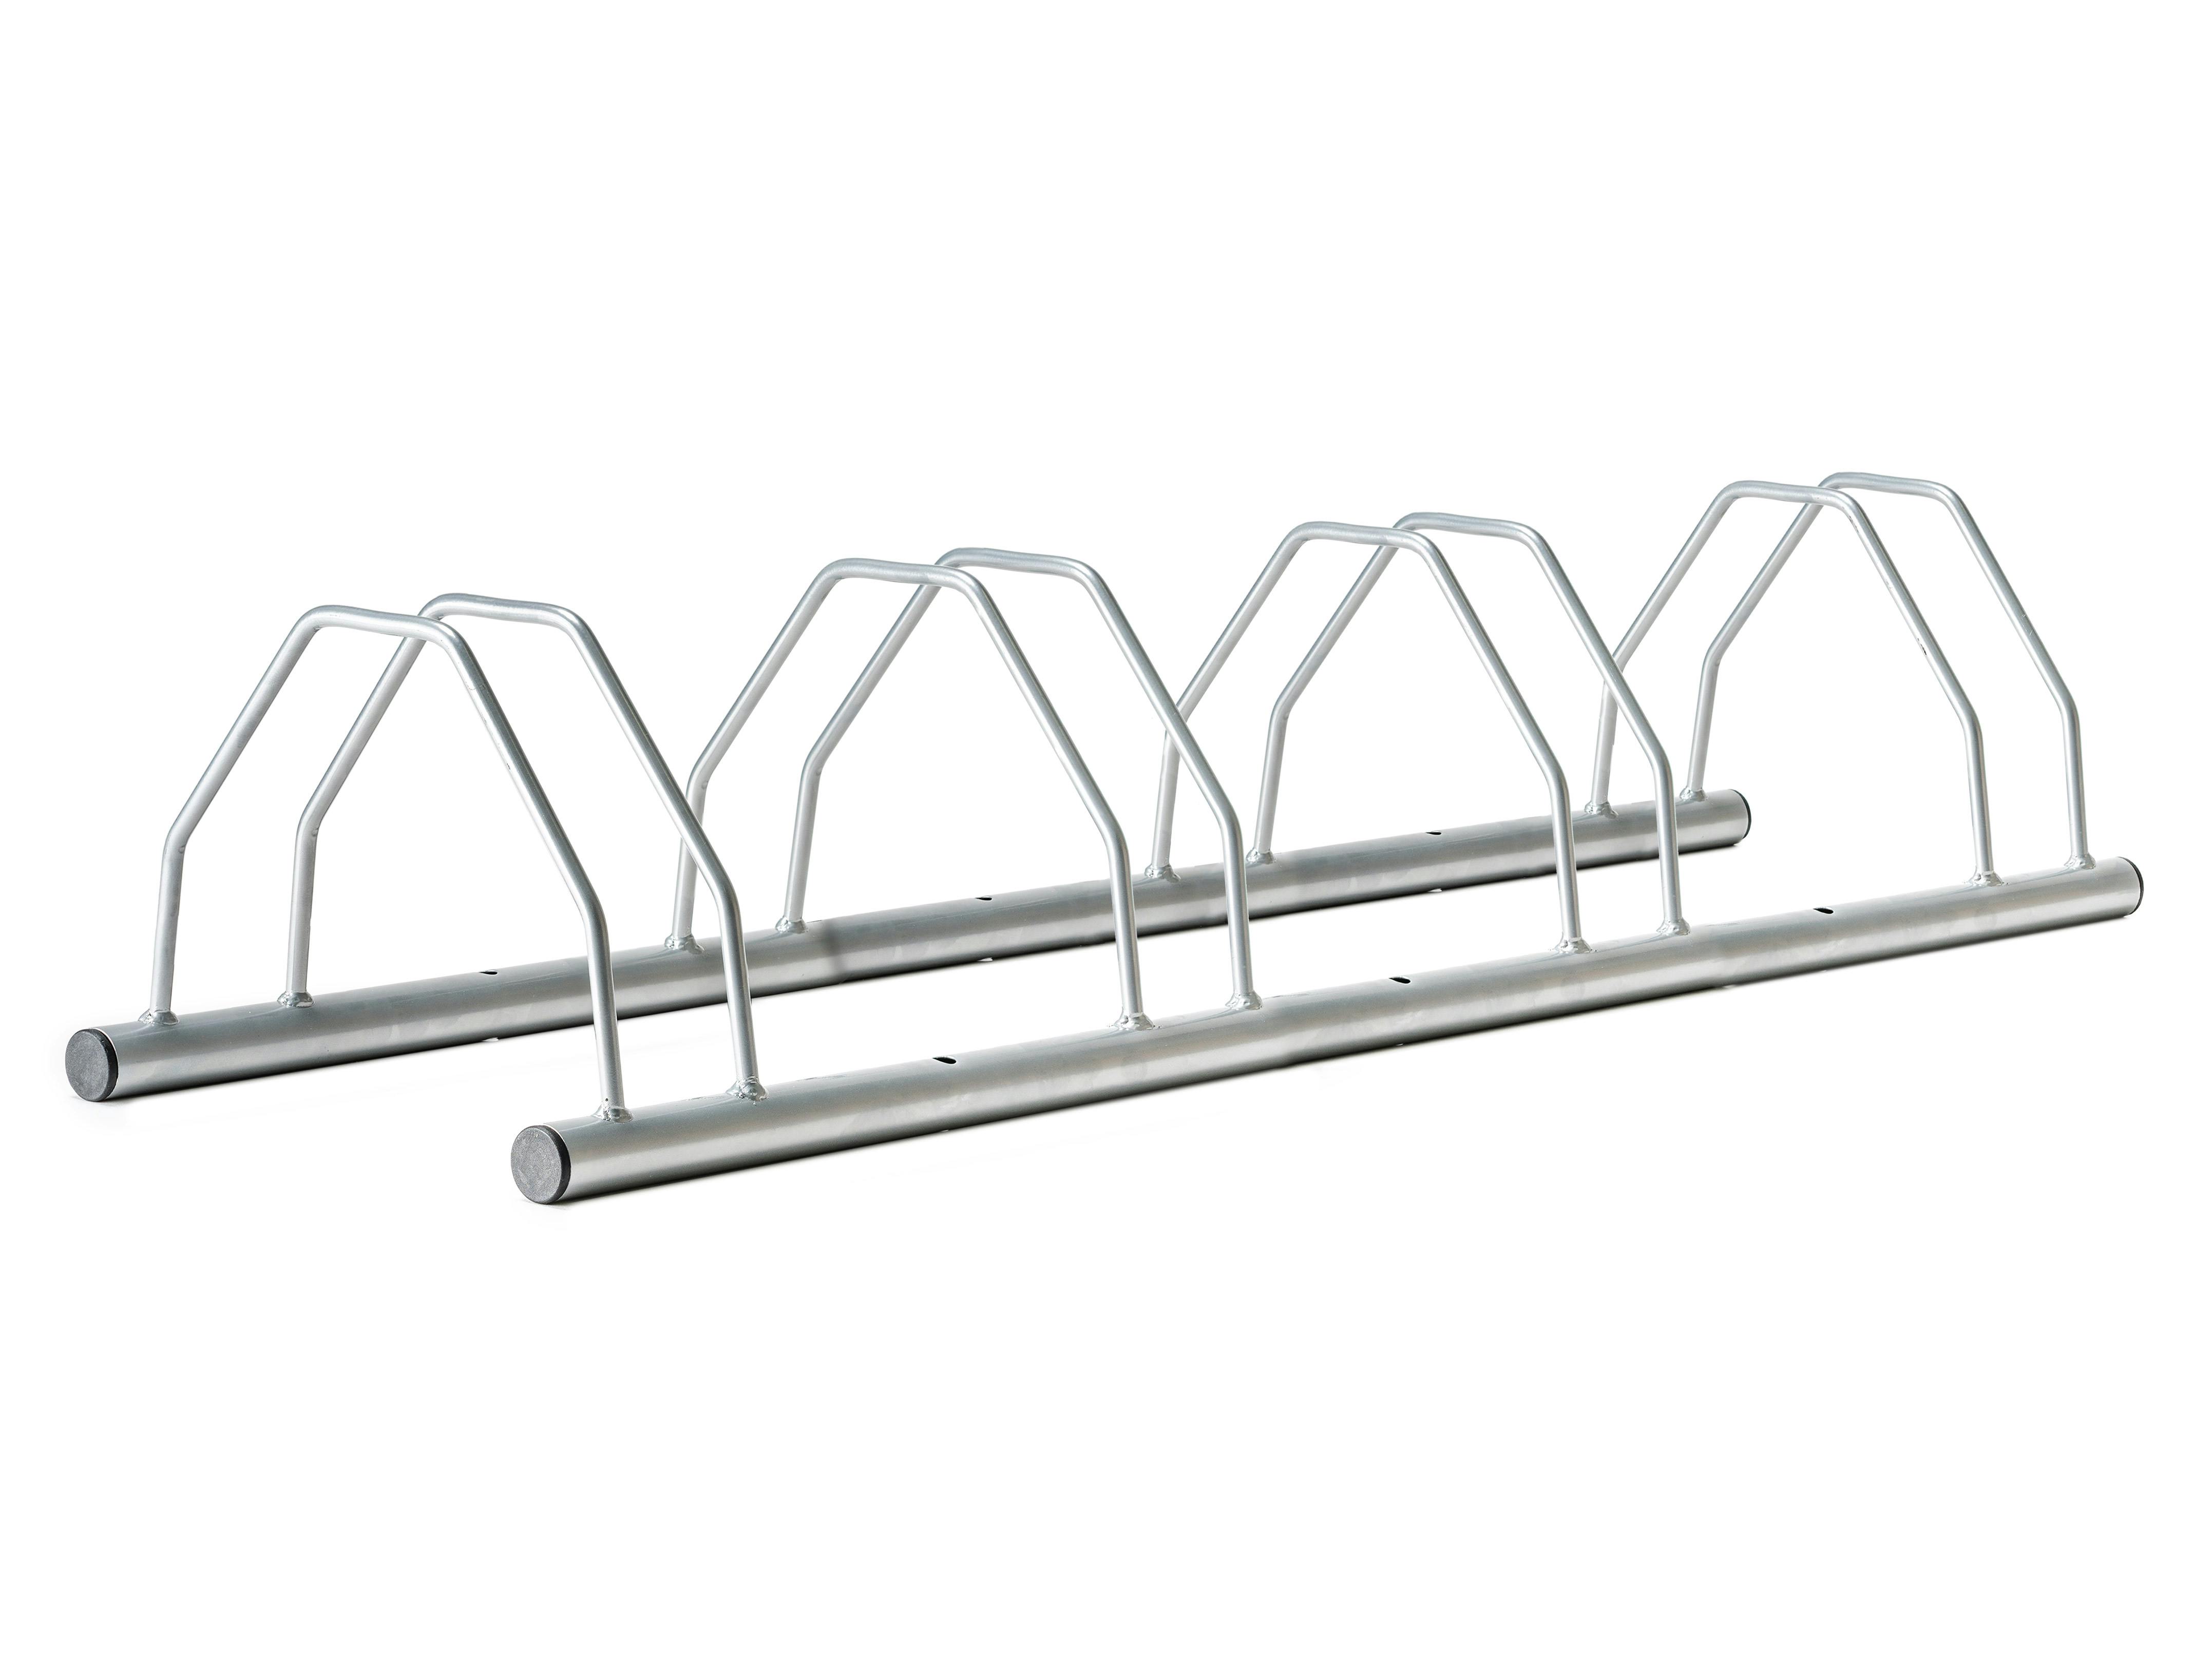 Bike Rack Stand Quad - Bike Racks - Sports & Outdoors - Home & Outdoor  Living at Trade Tested